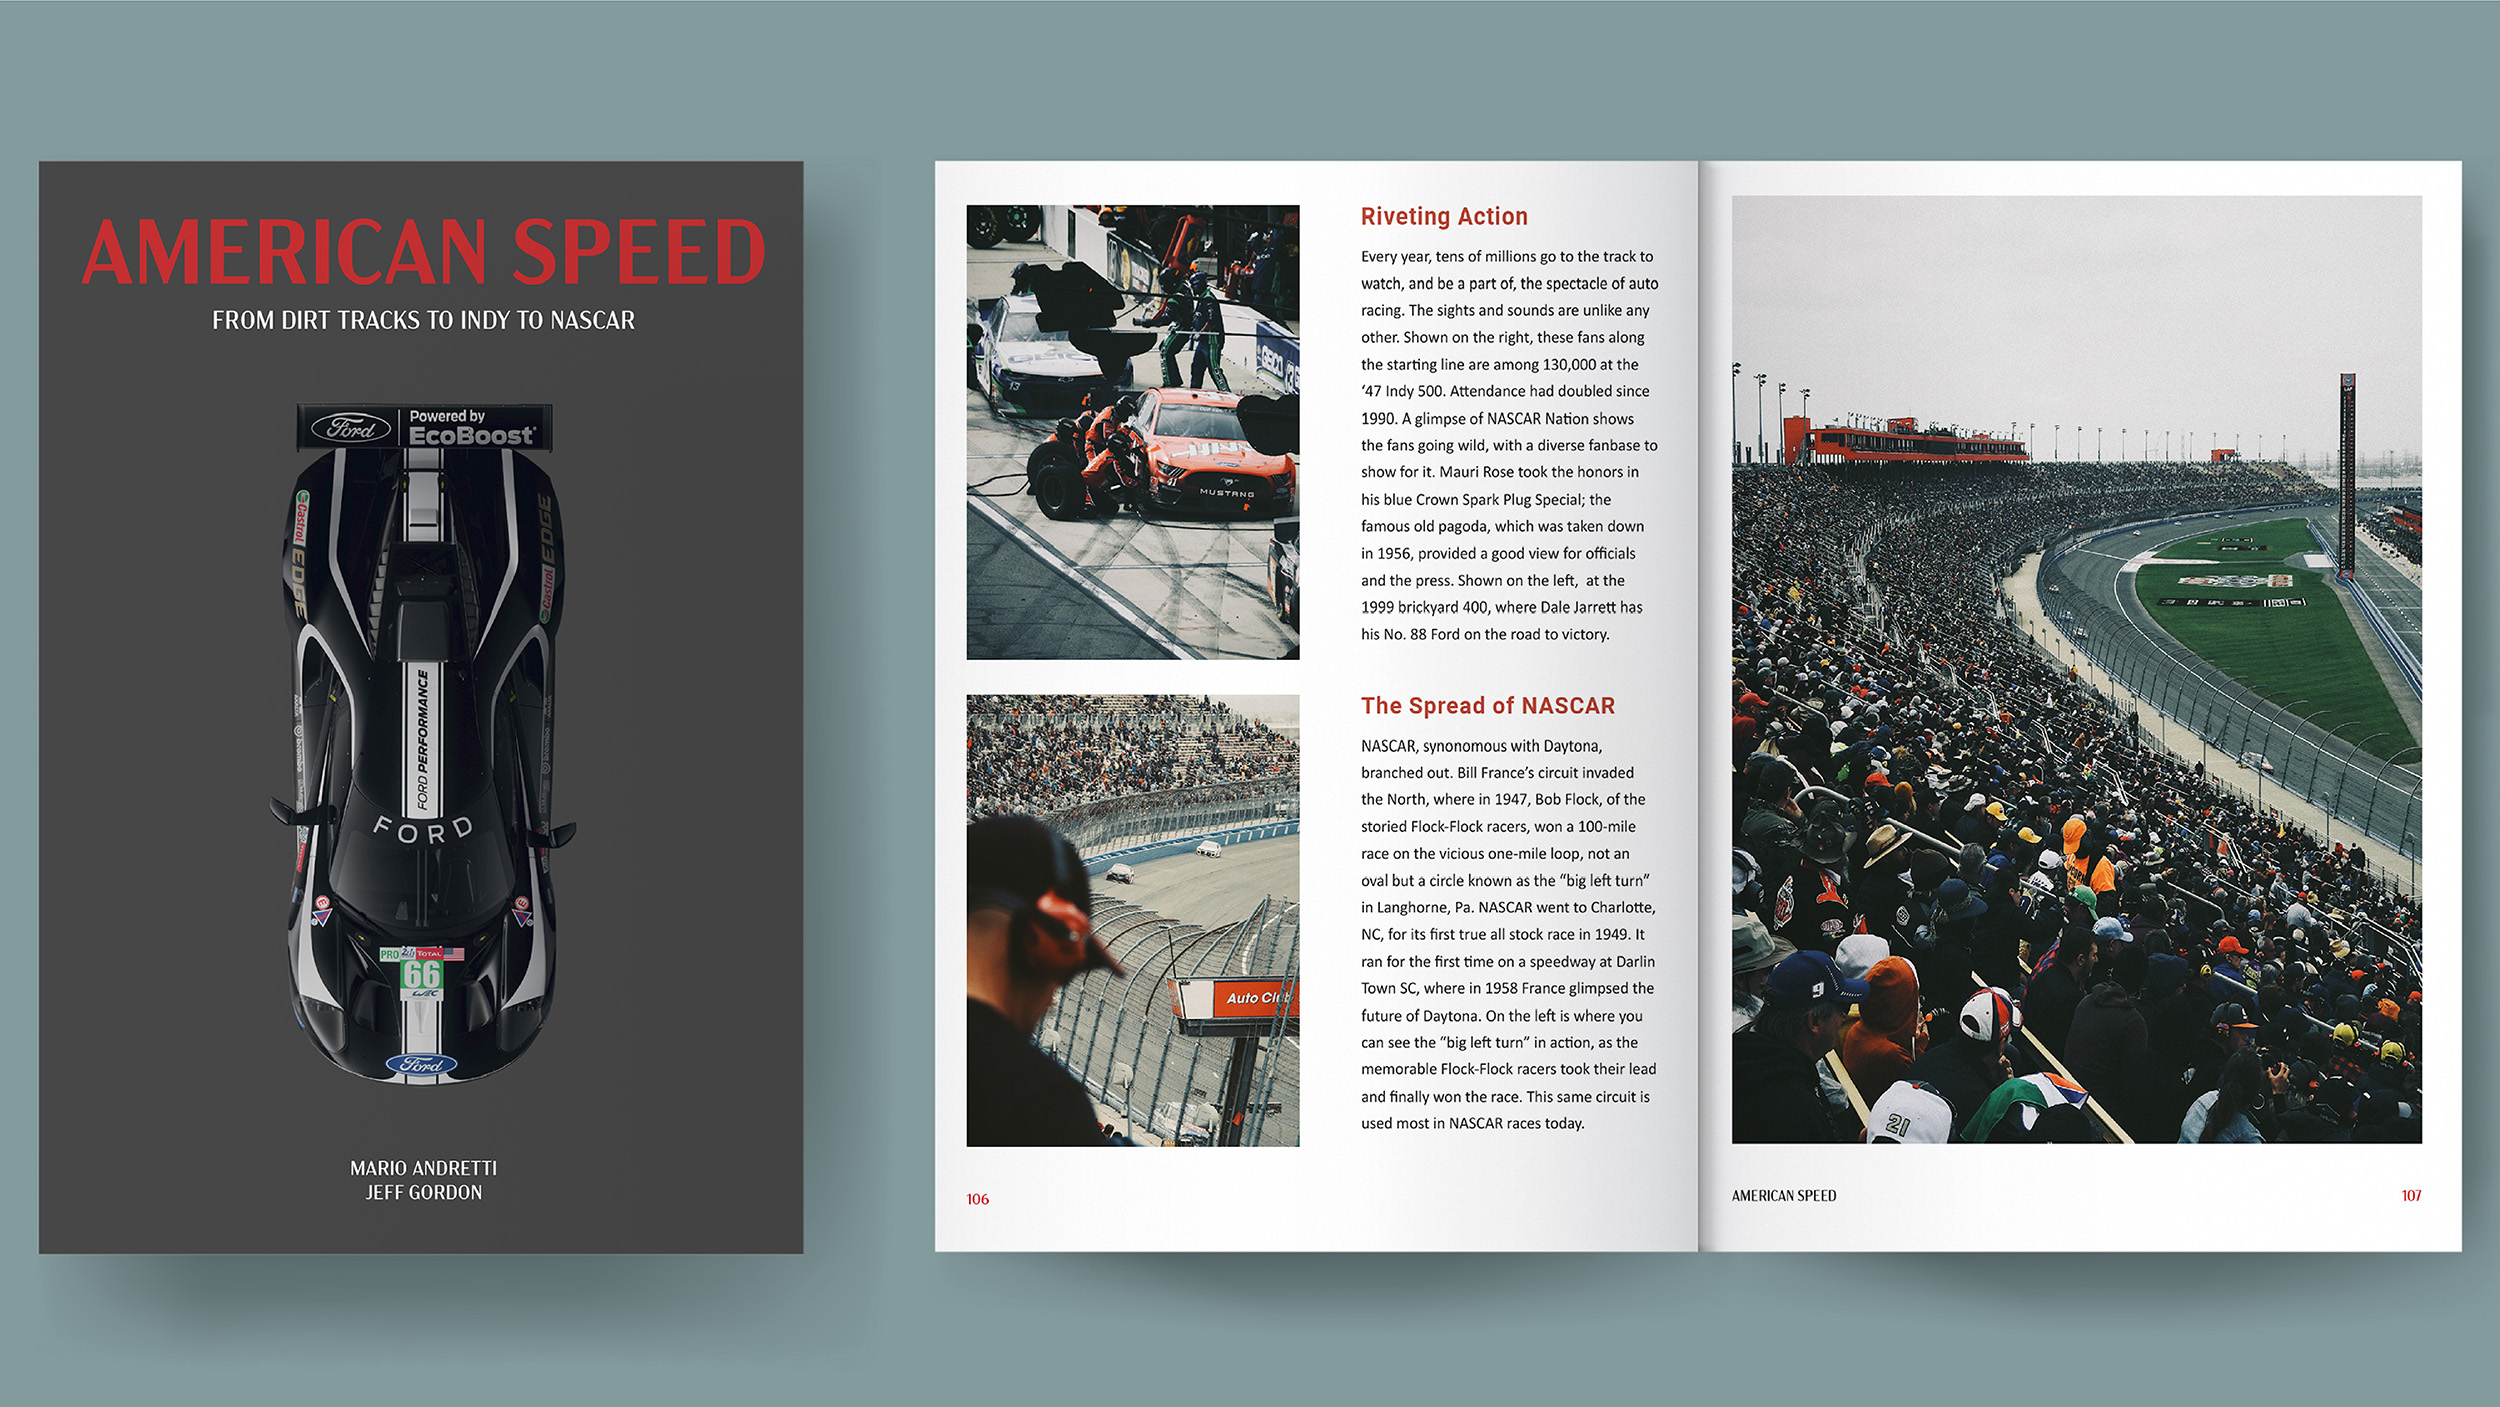 “American Speed”  / “American Speed,” 7"x10" inches, Coffee table book redesign.